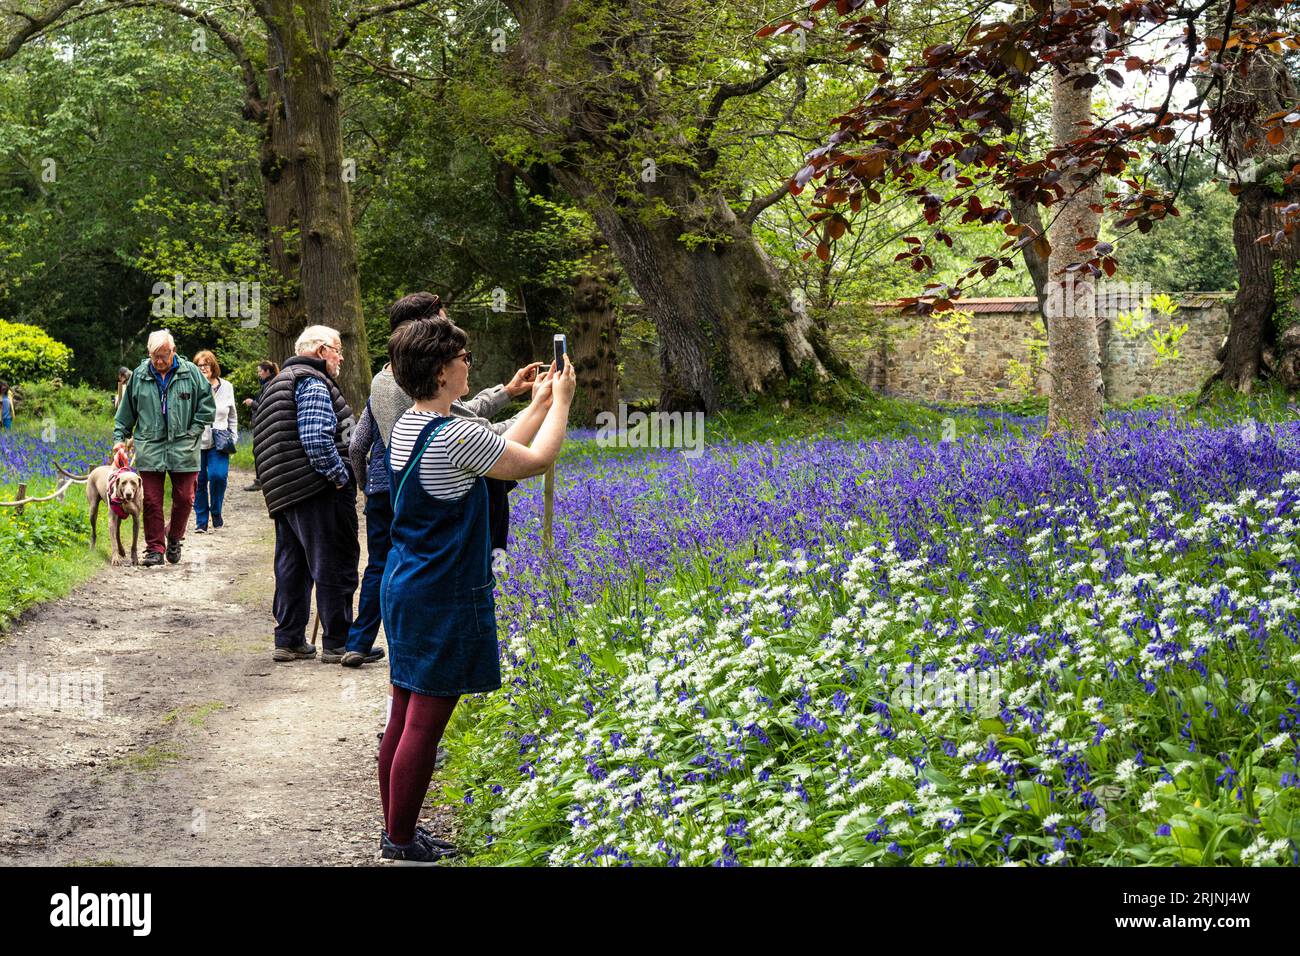 People visiting the Annual Bluebll Festival at the historic Enys Gardens in Penryn in Cornwall in the UK. Stock Photo